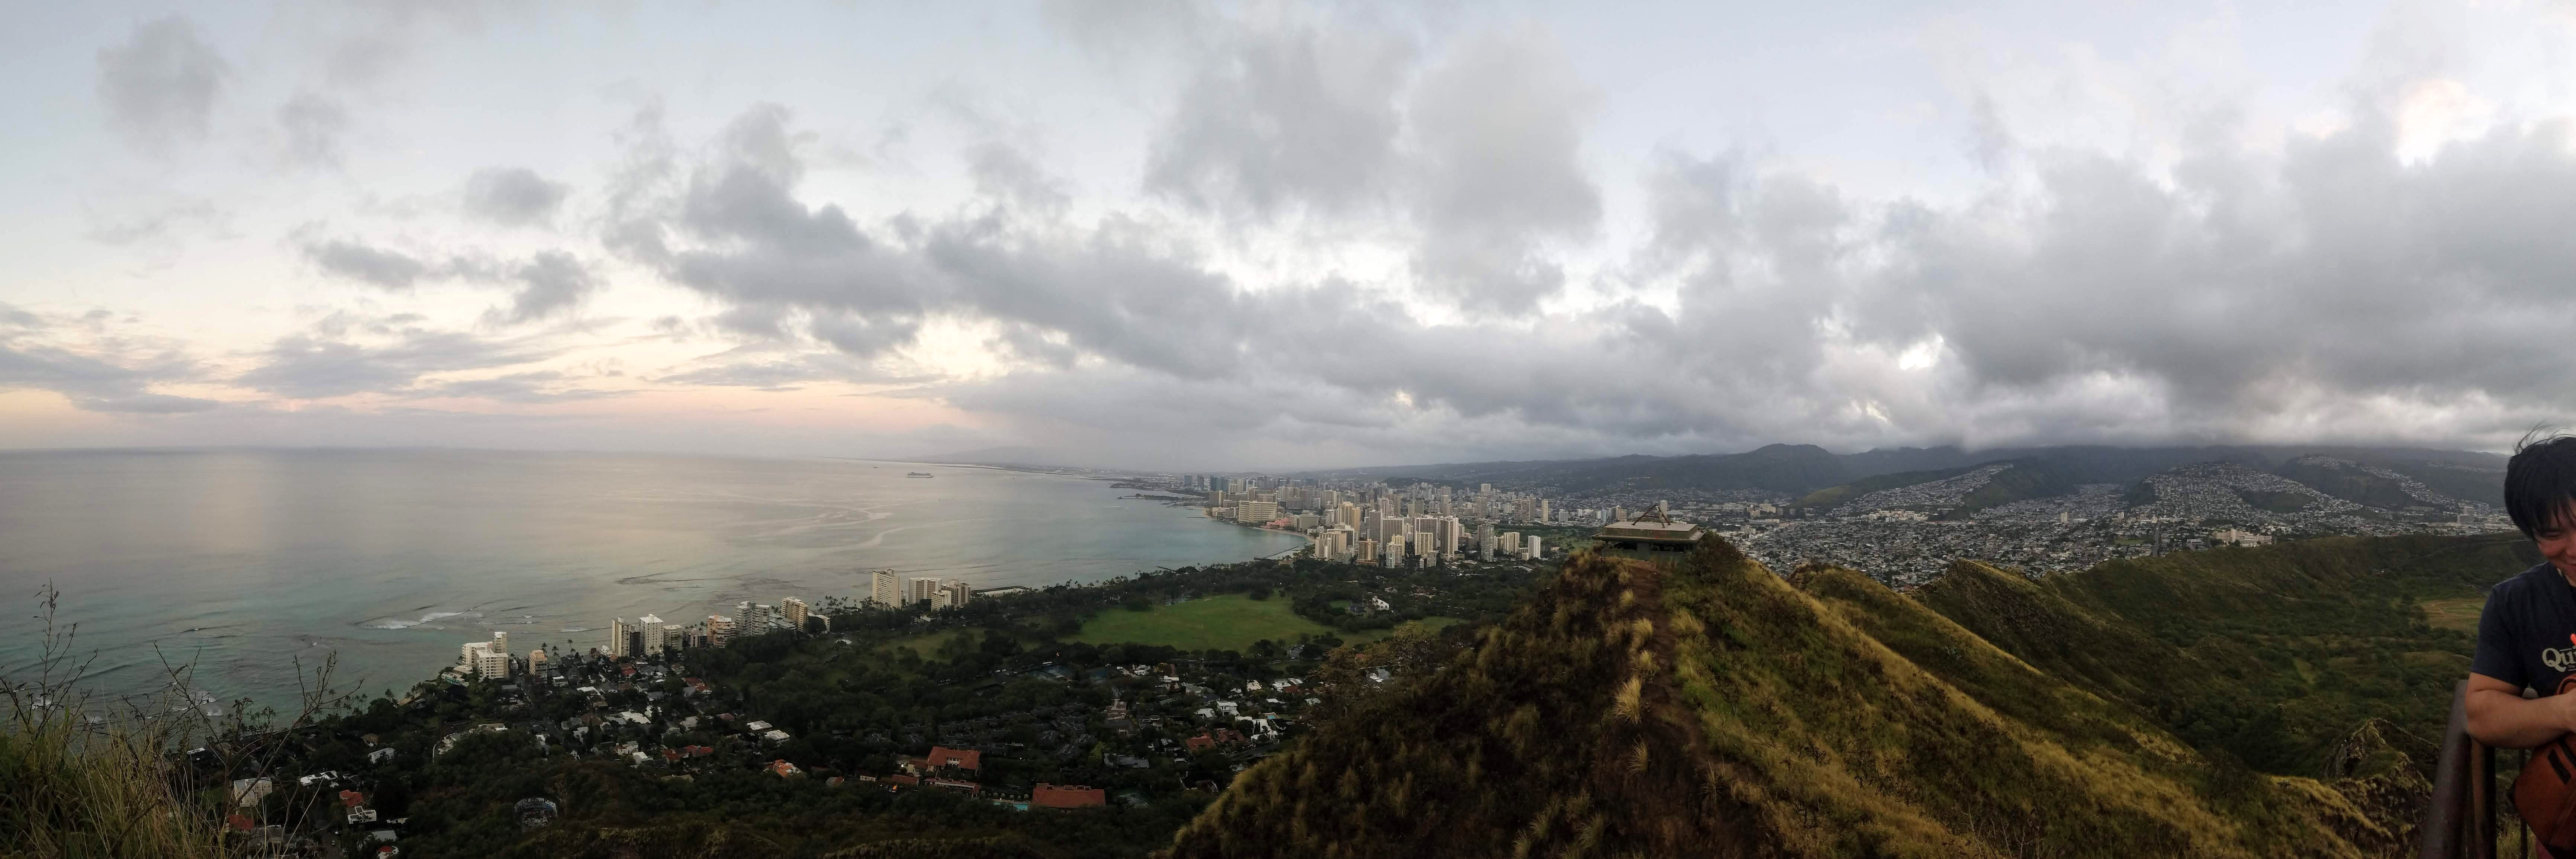 the view from the top of Diamond Head crater. this view is facing Waikiki. The ocean is to the left and the beach and Waikiki is to the right.